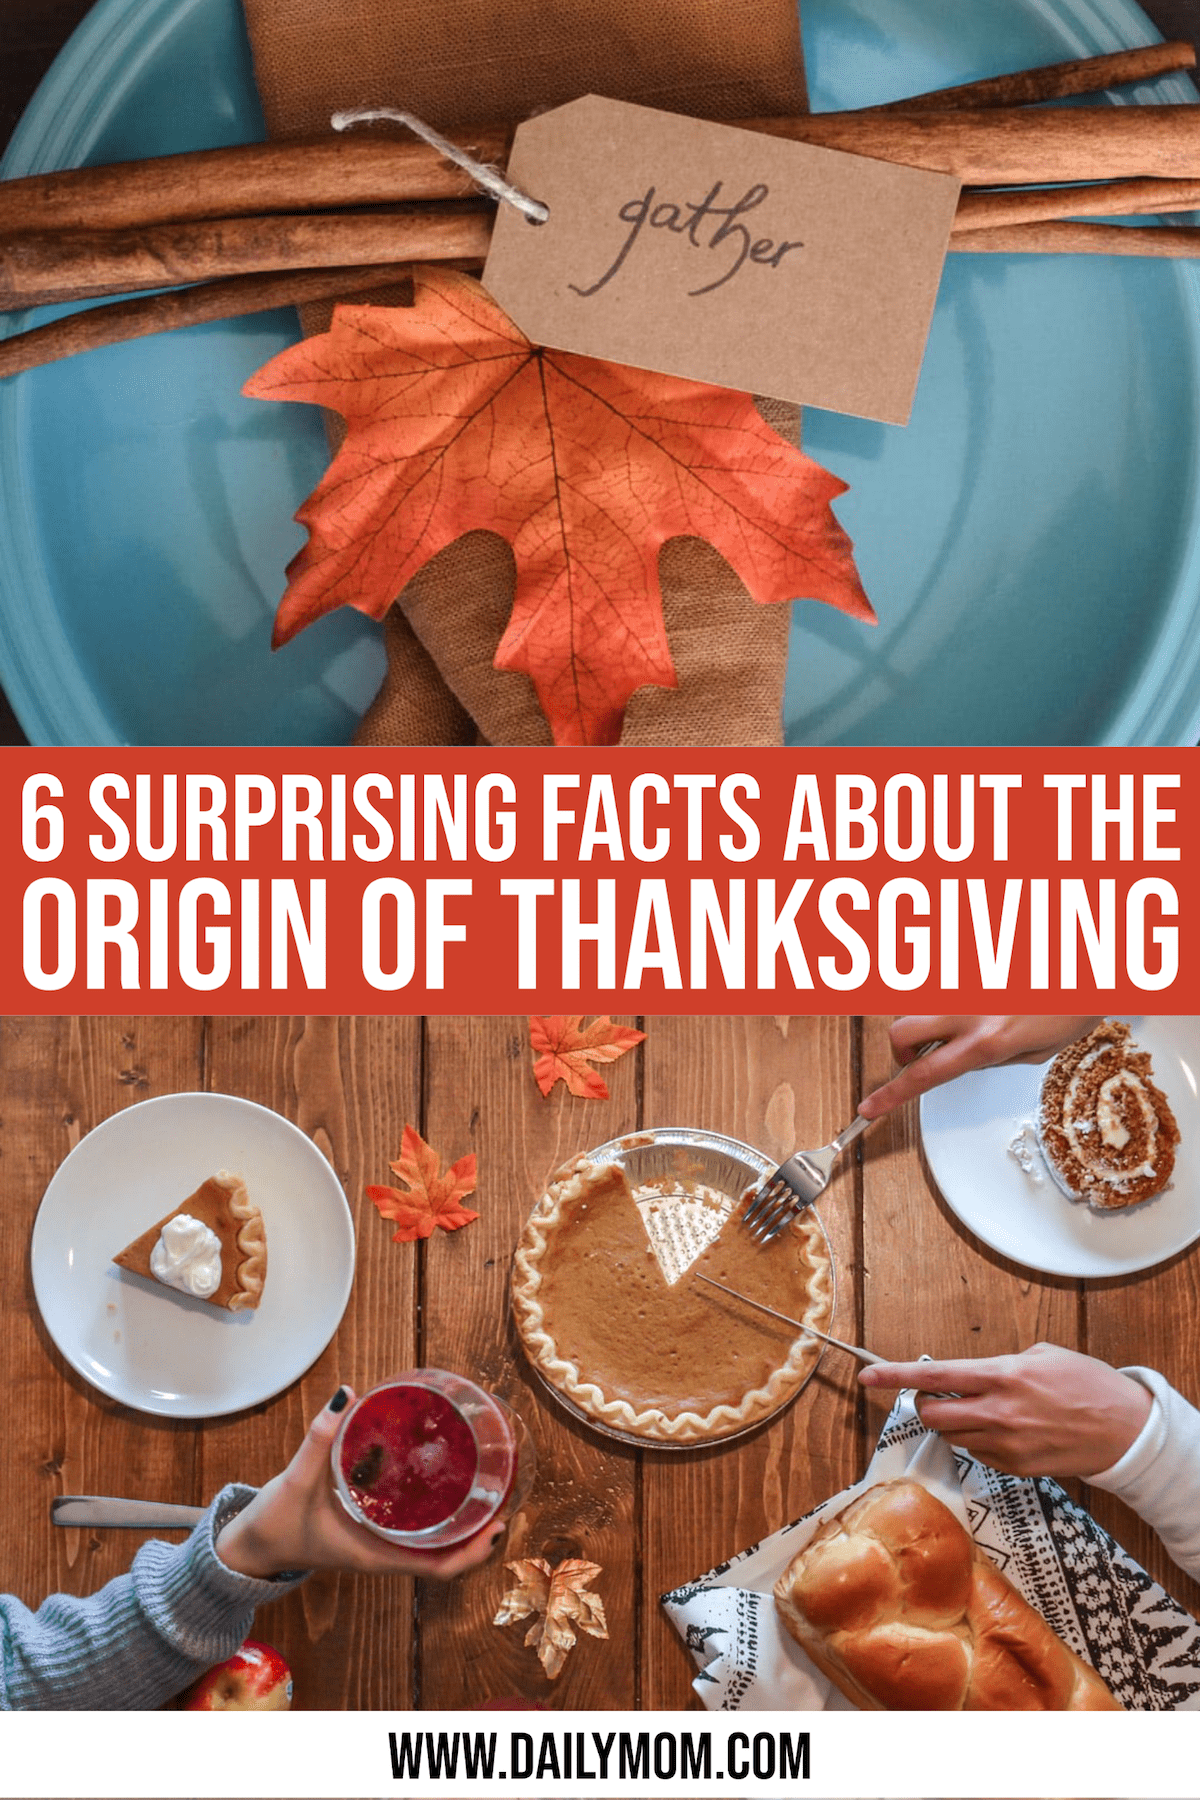 6 Surprising Facts About The Origin Of Thanksgiving You Didn’T Learn In School